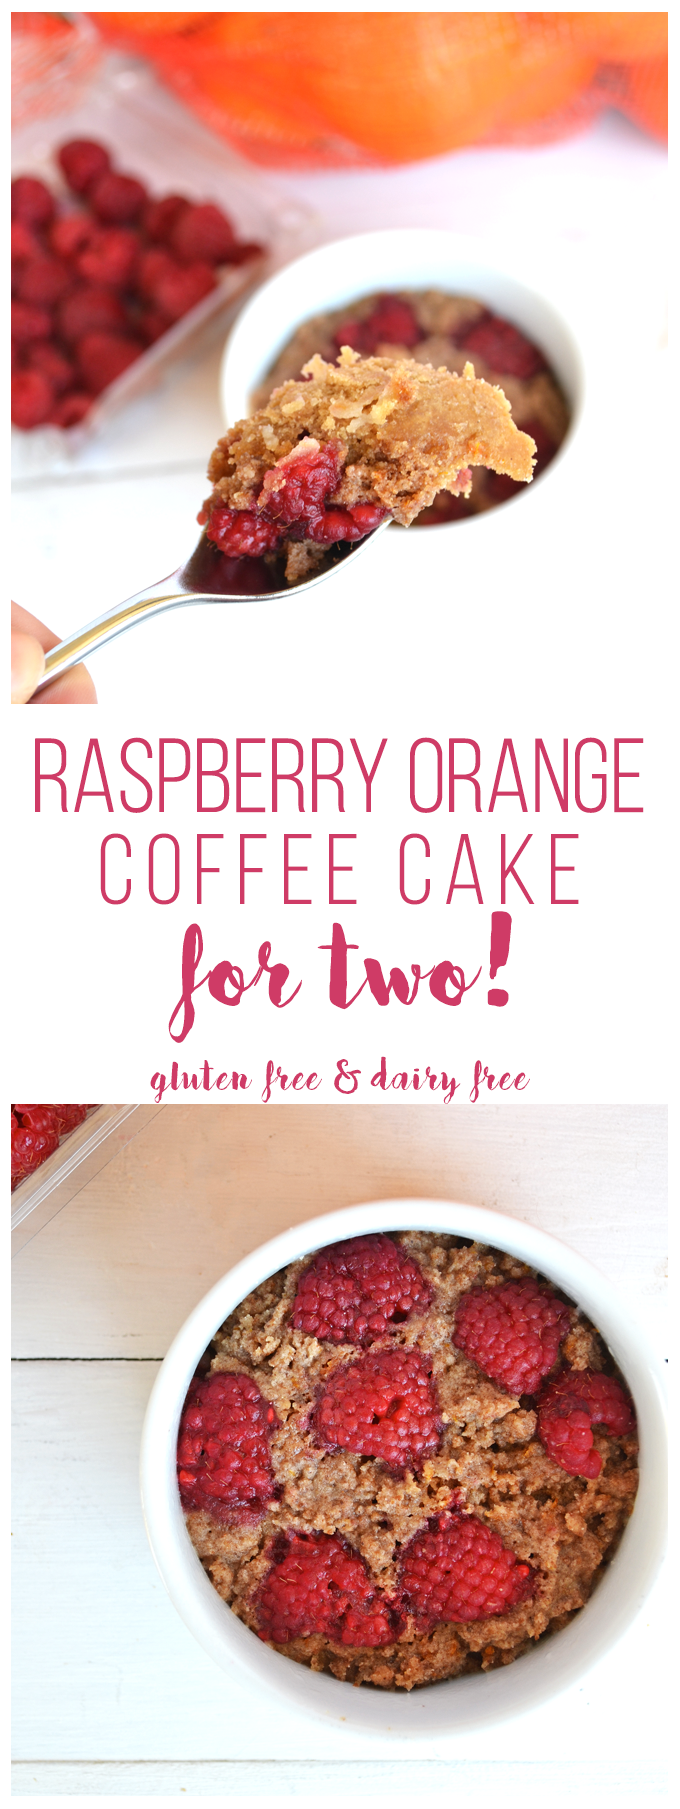 This Raspberry Orange Coffee cake is gluten free, dairy free and cooks in the microwave! It is the perfect amount for two people to share!